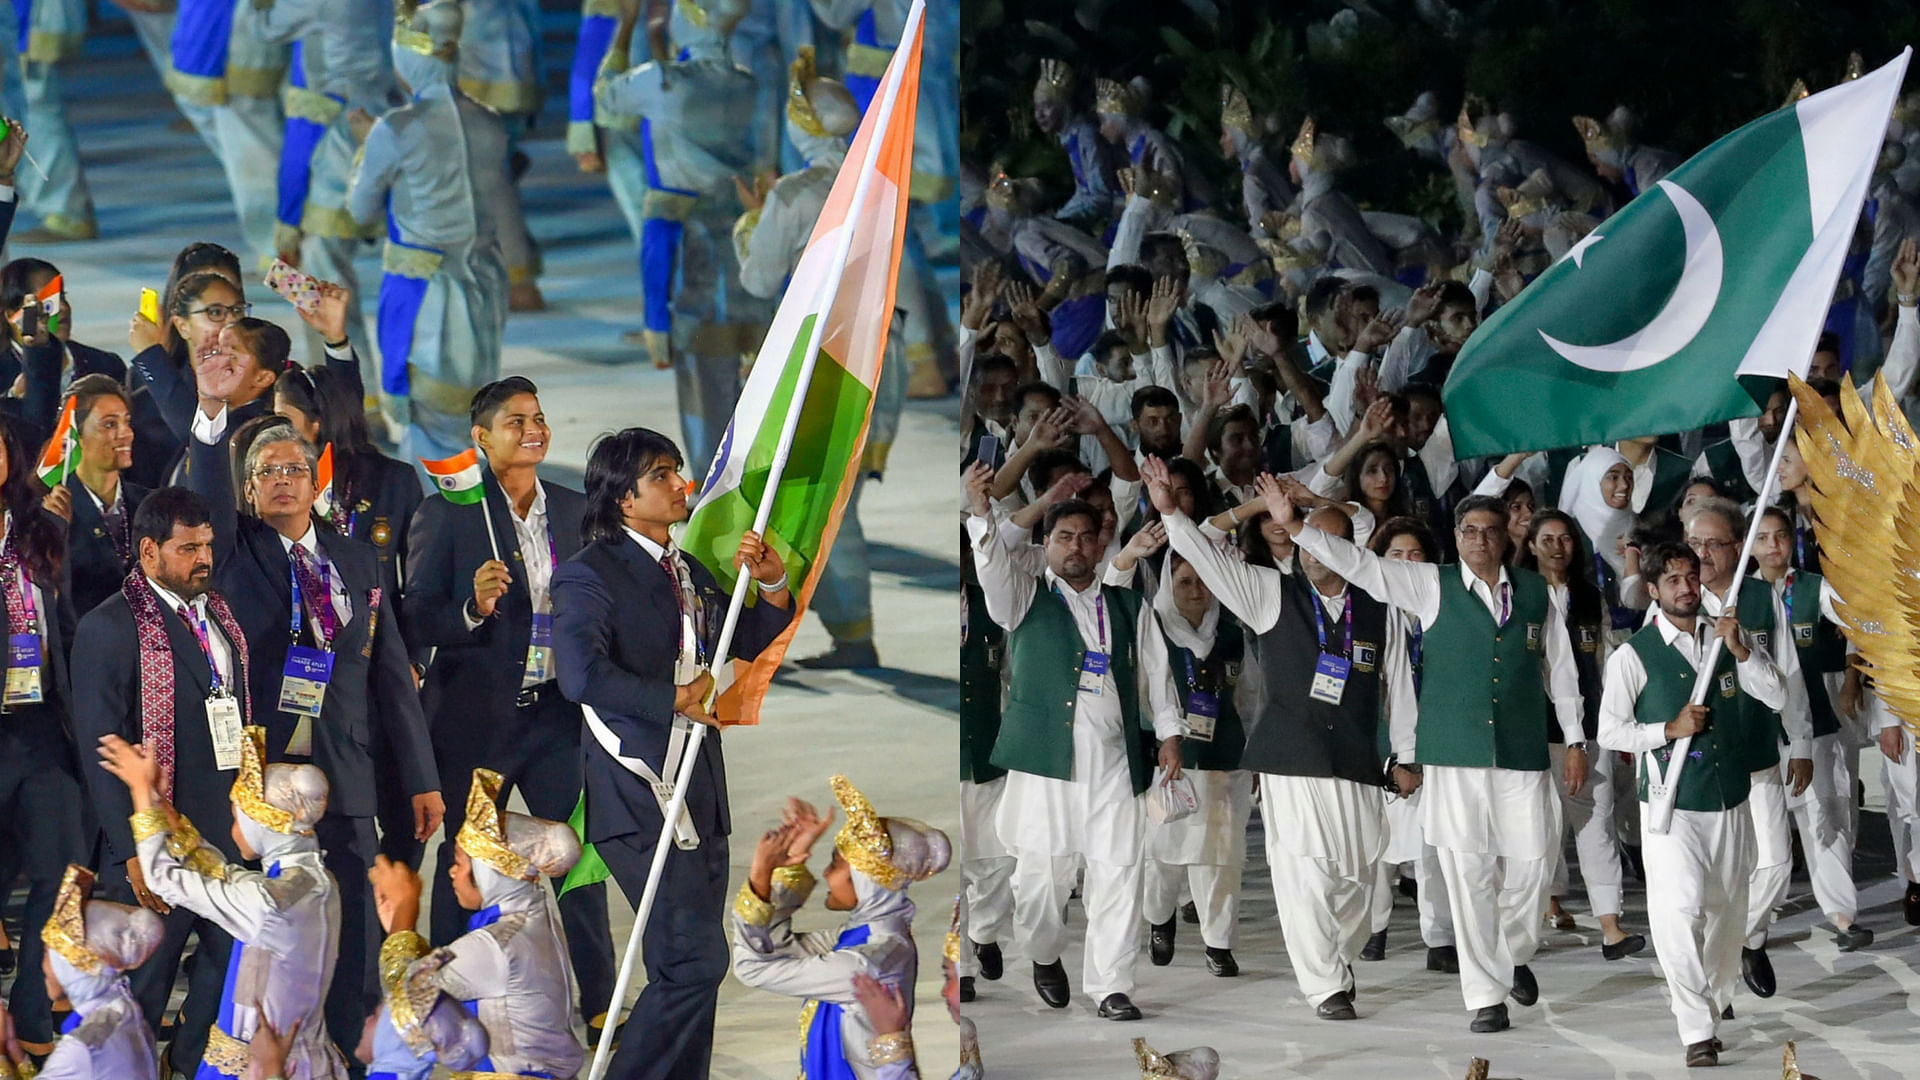 At the ongoing Asian Games, athletes from India and Pakistan mingle freely and even cheer for each other.